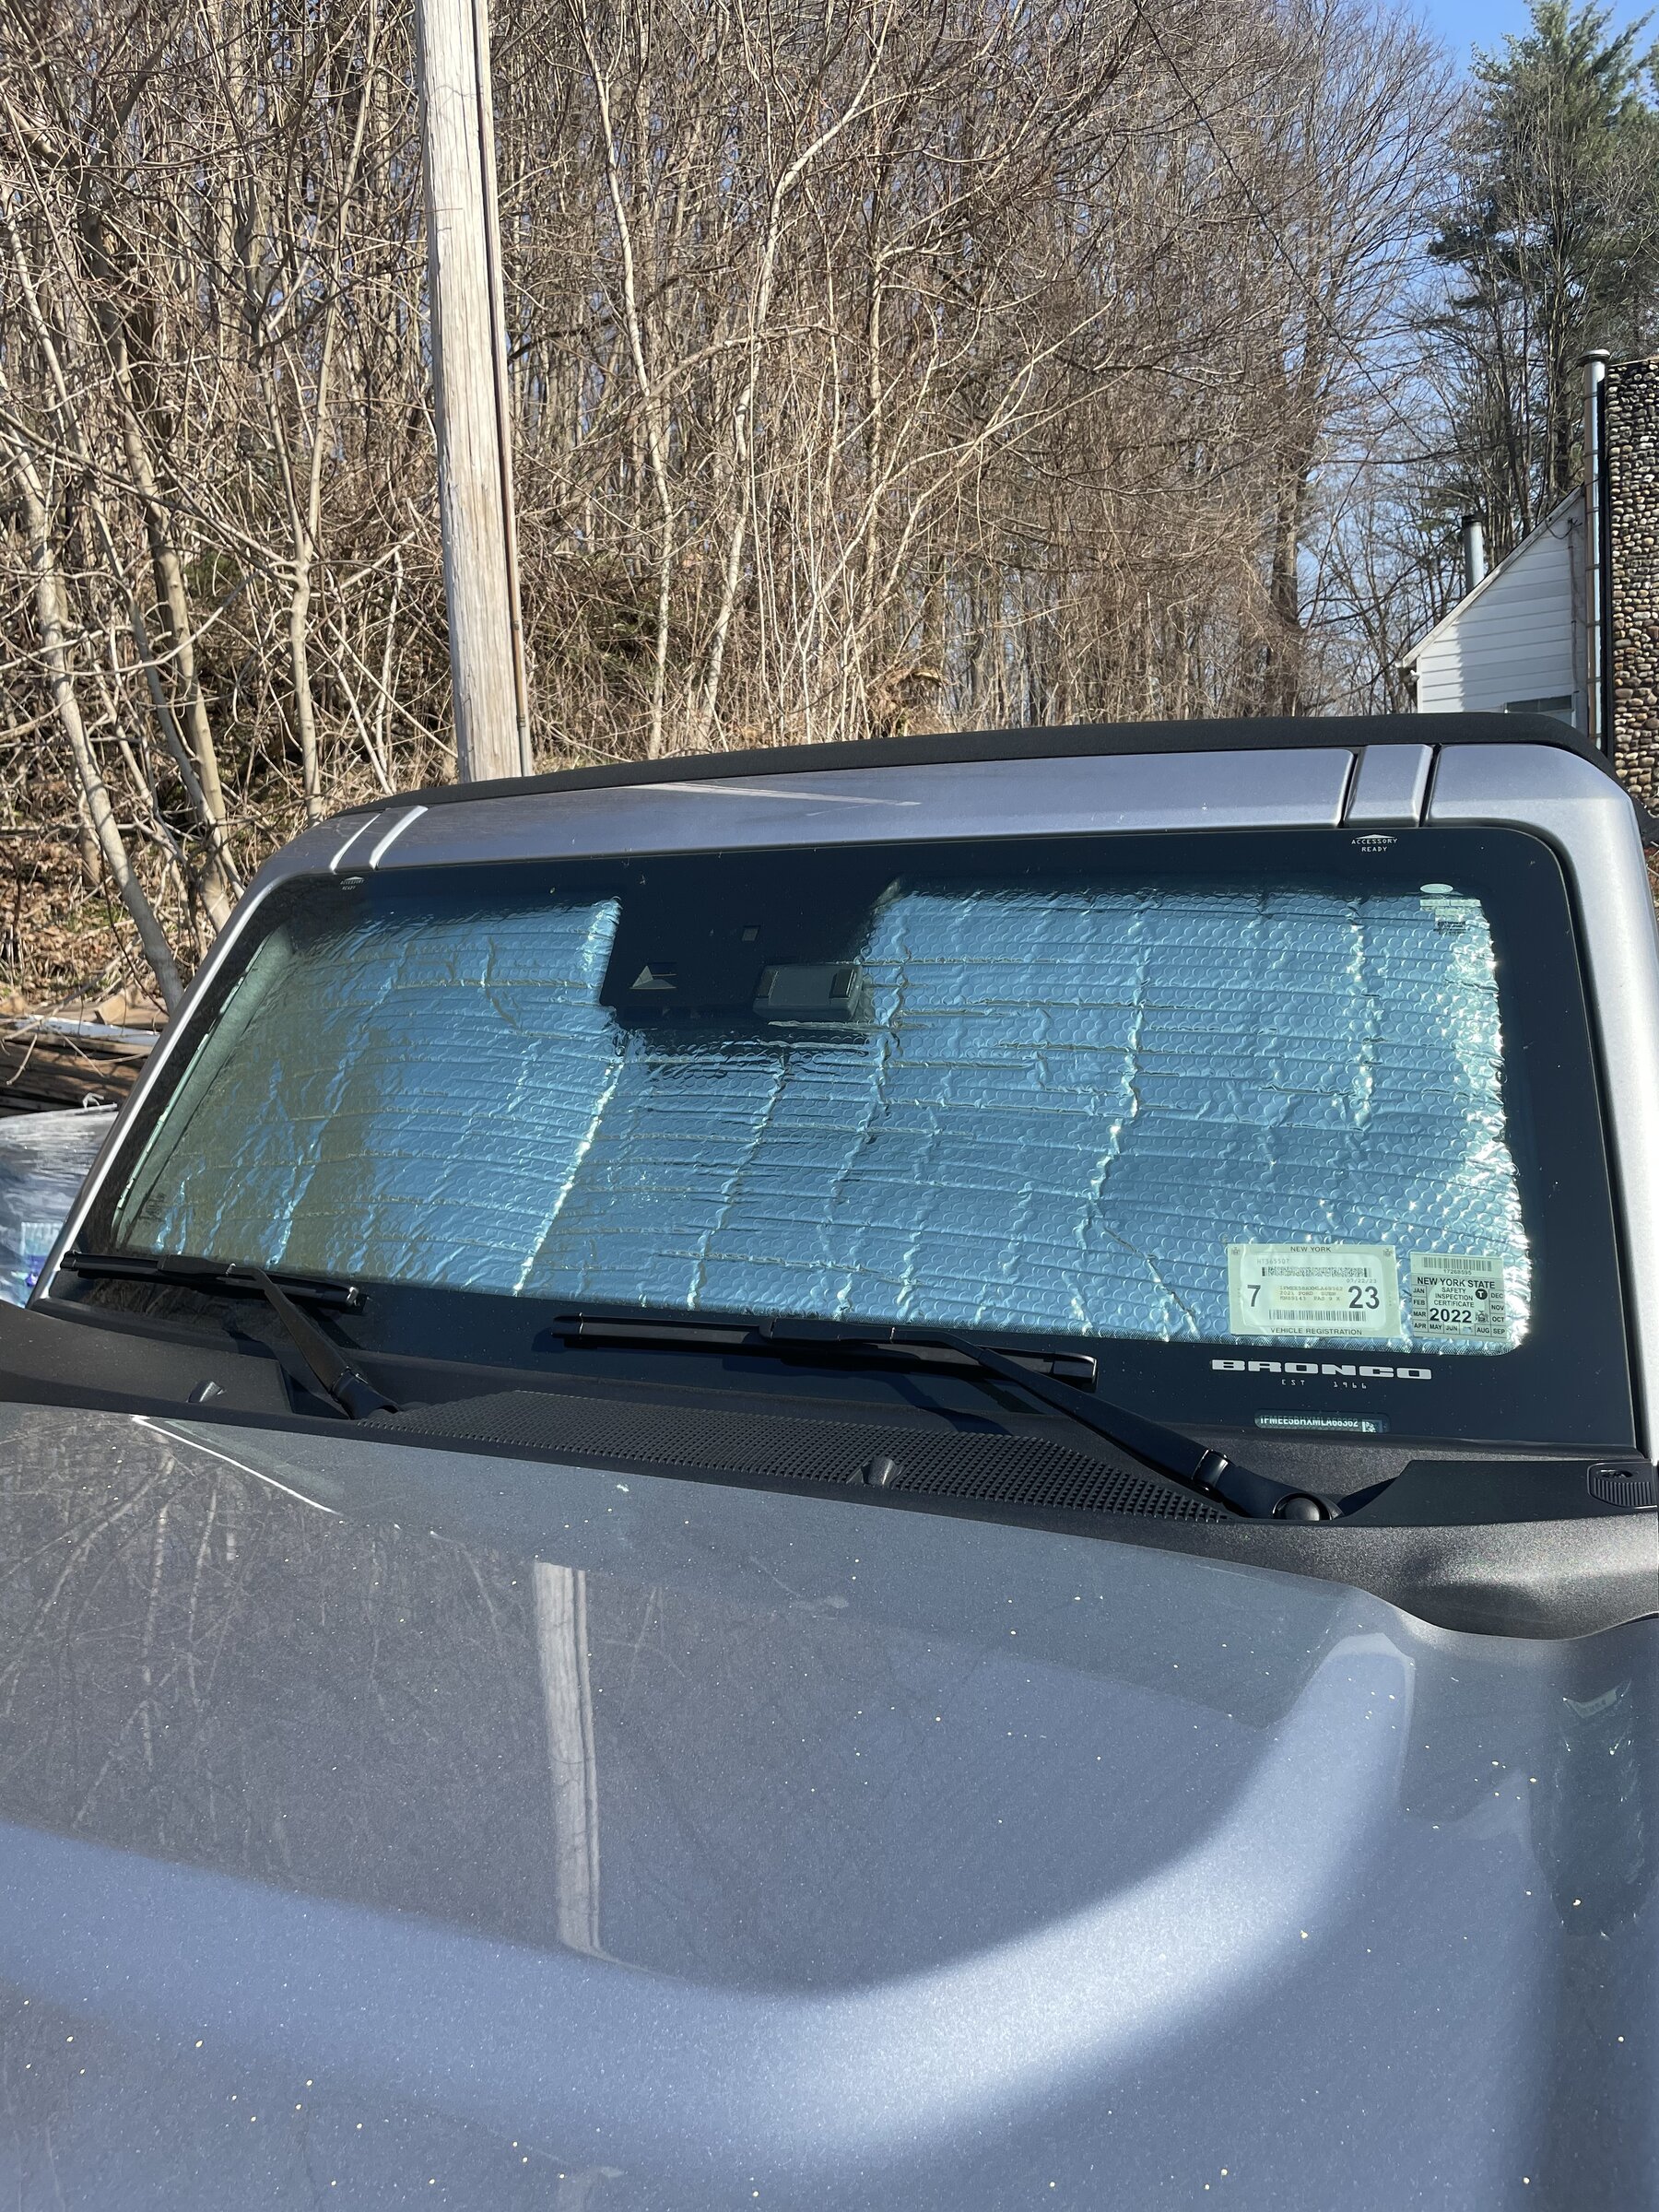 Ford Bronco Mabett releases "Windshield Sunshade" and it's on sale DED59ABA-6981-4328-BD29-F41663C6786A